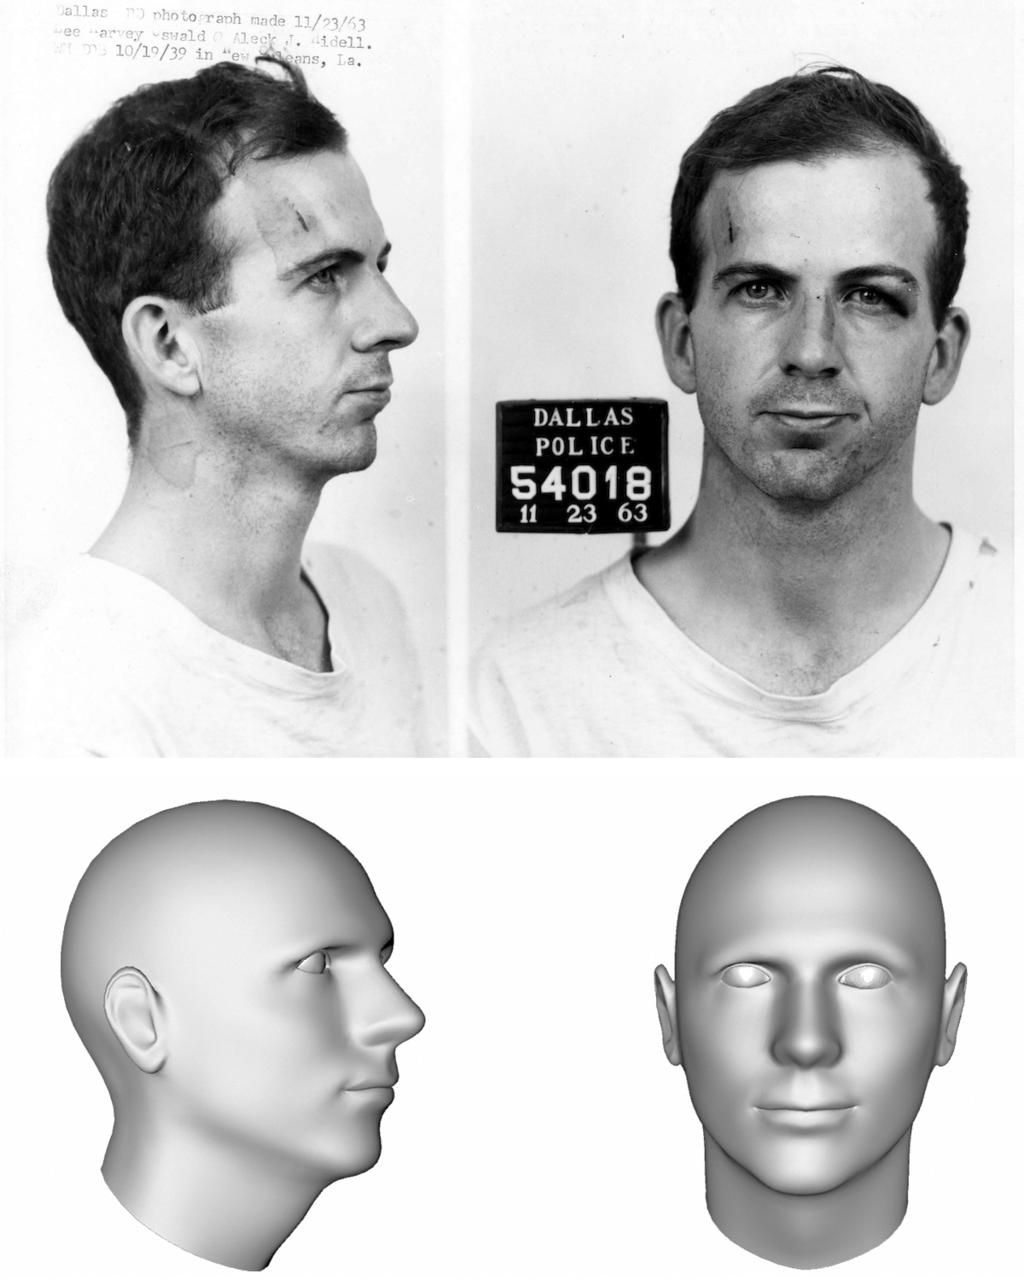 Last but not least 1733 Figure 2. A profile and frontal view of Oswald (top) are used to construct a 3-D model (bottom). Shown in figures 3 and 4 are the rendered 3-D models and the original photo.